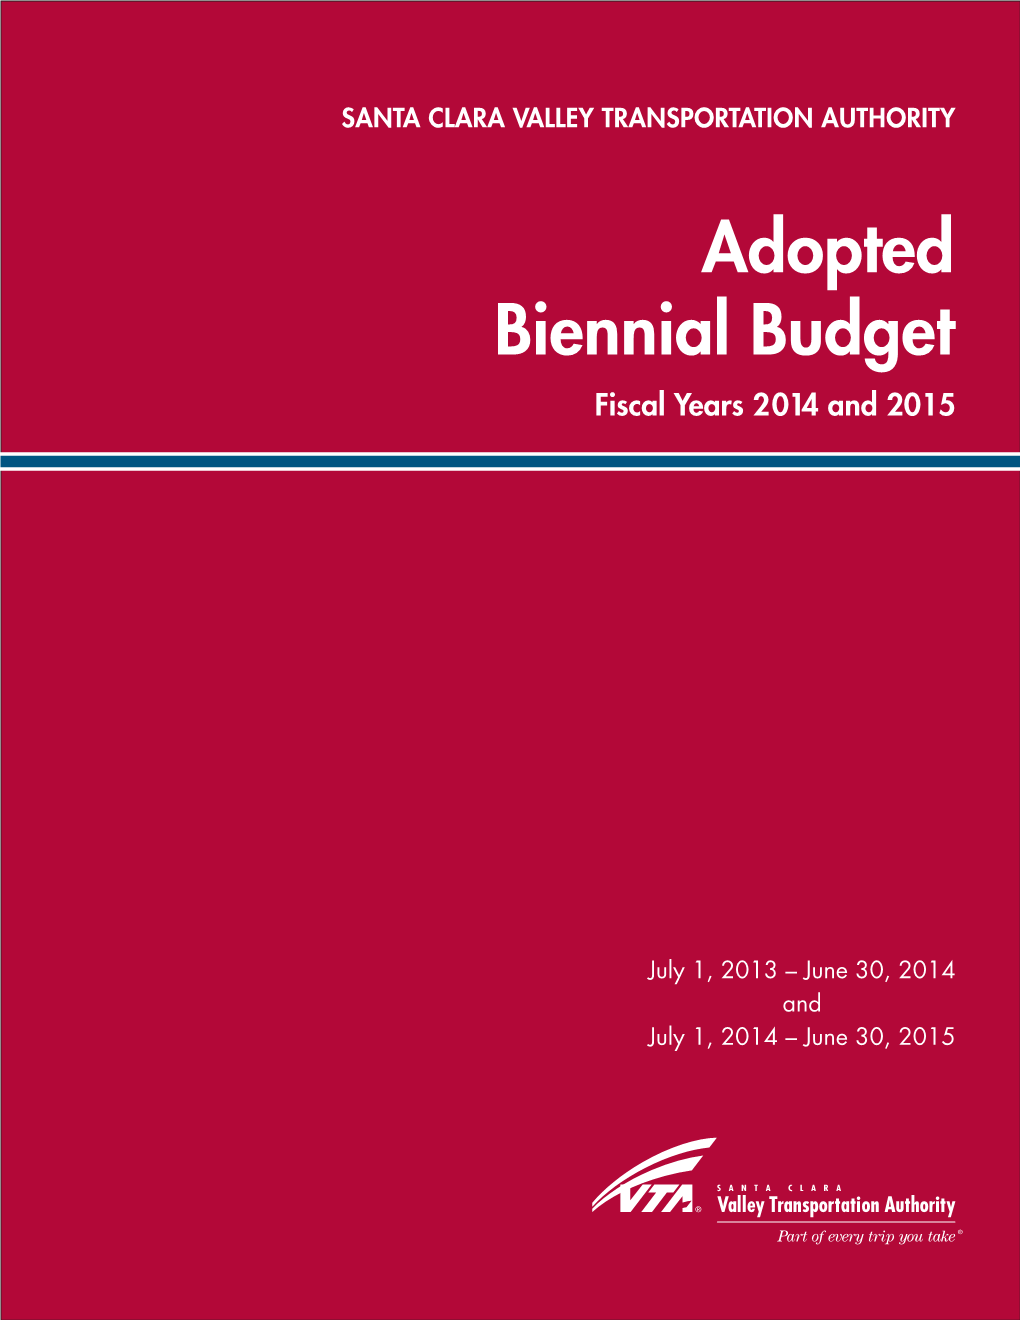 Adopted Biennial Budget Fiscal Years 2014 and 2015